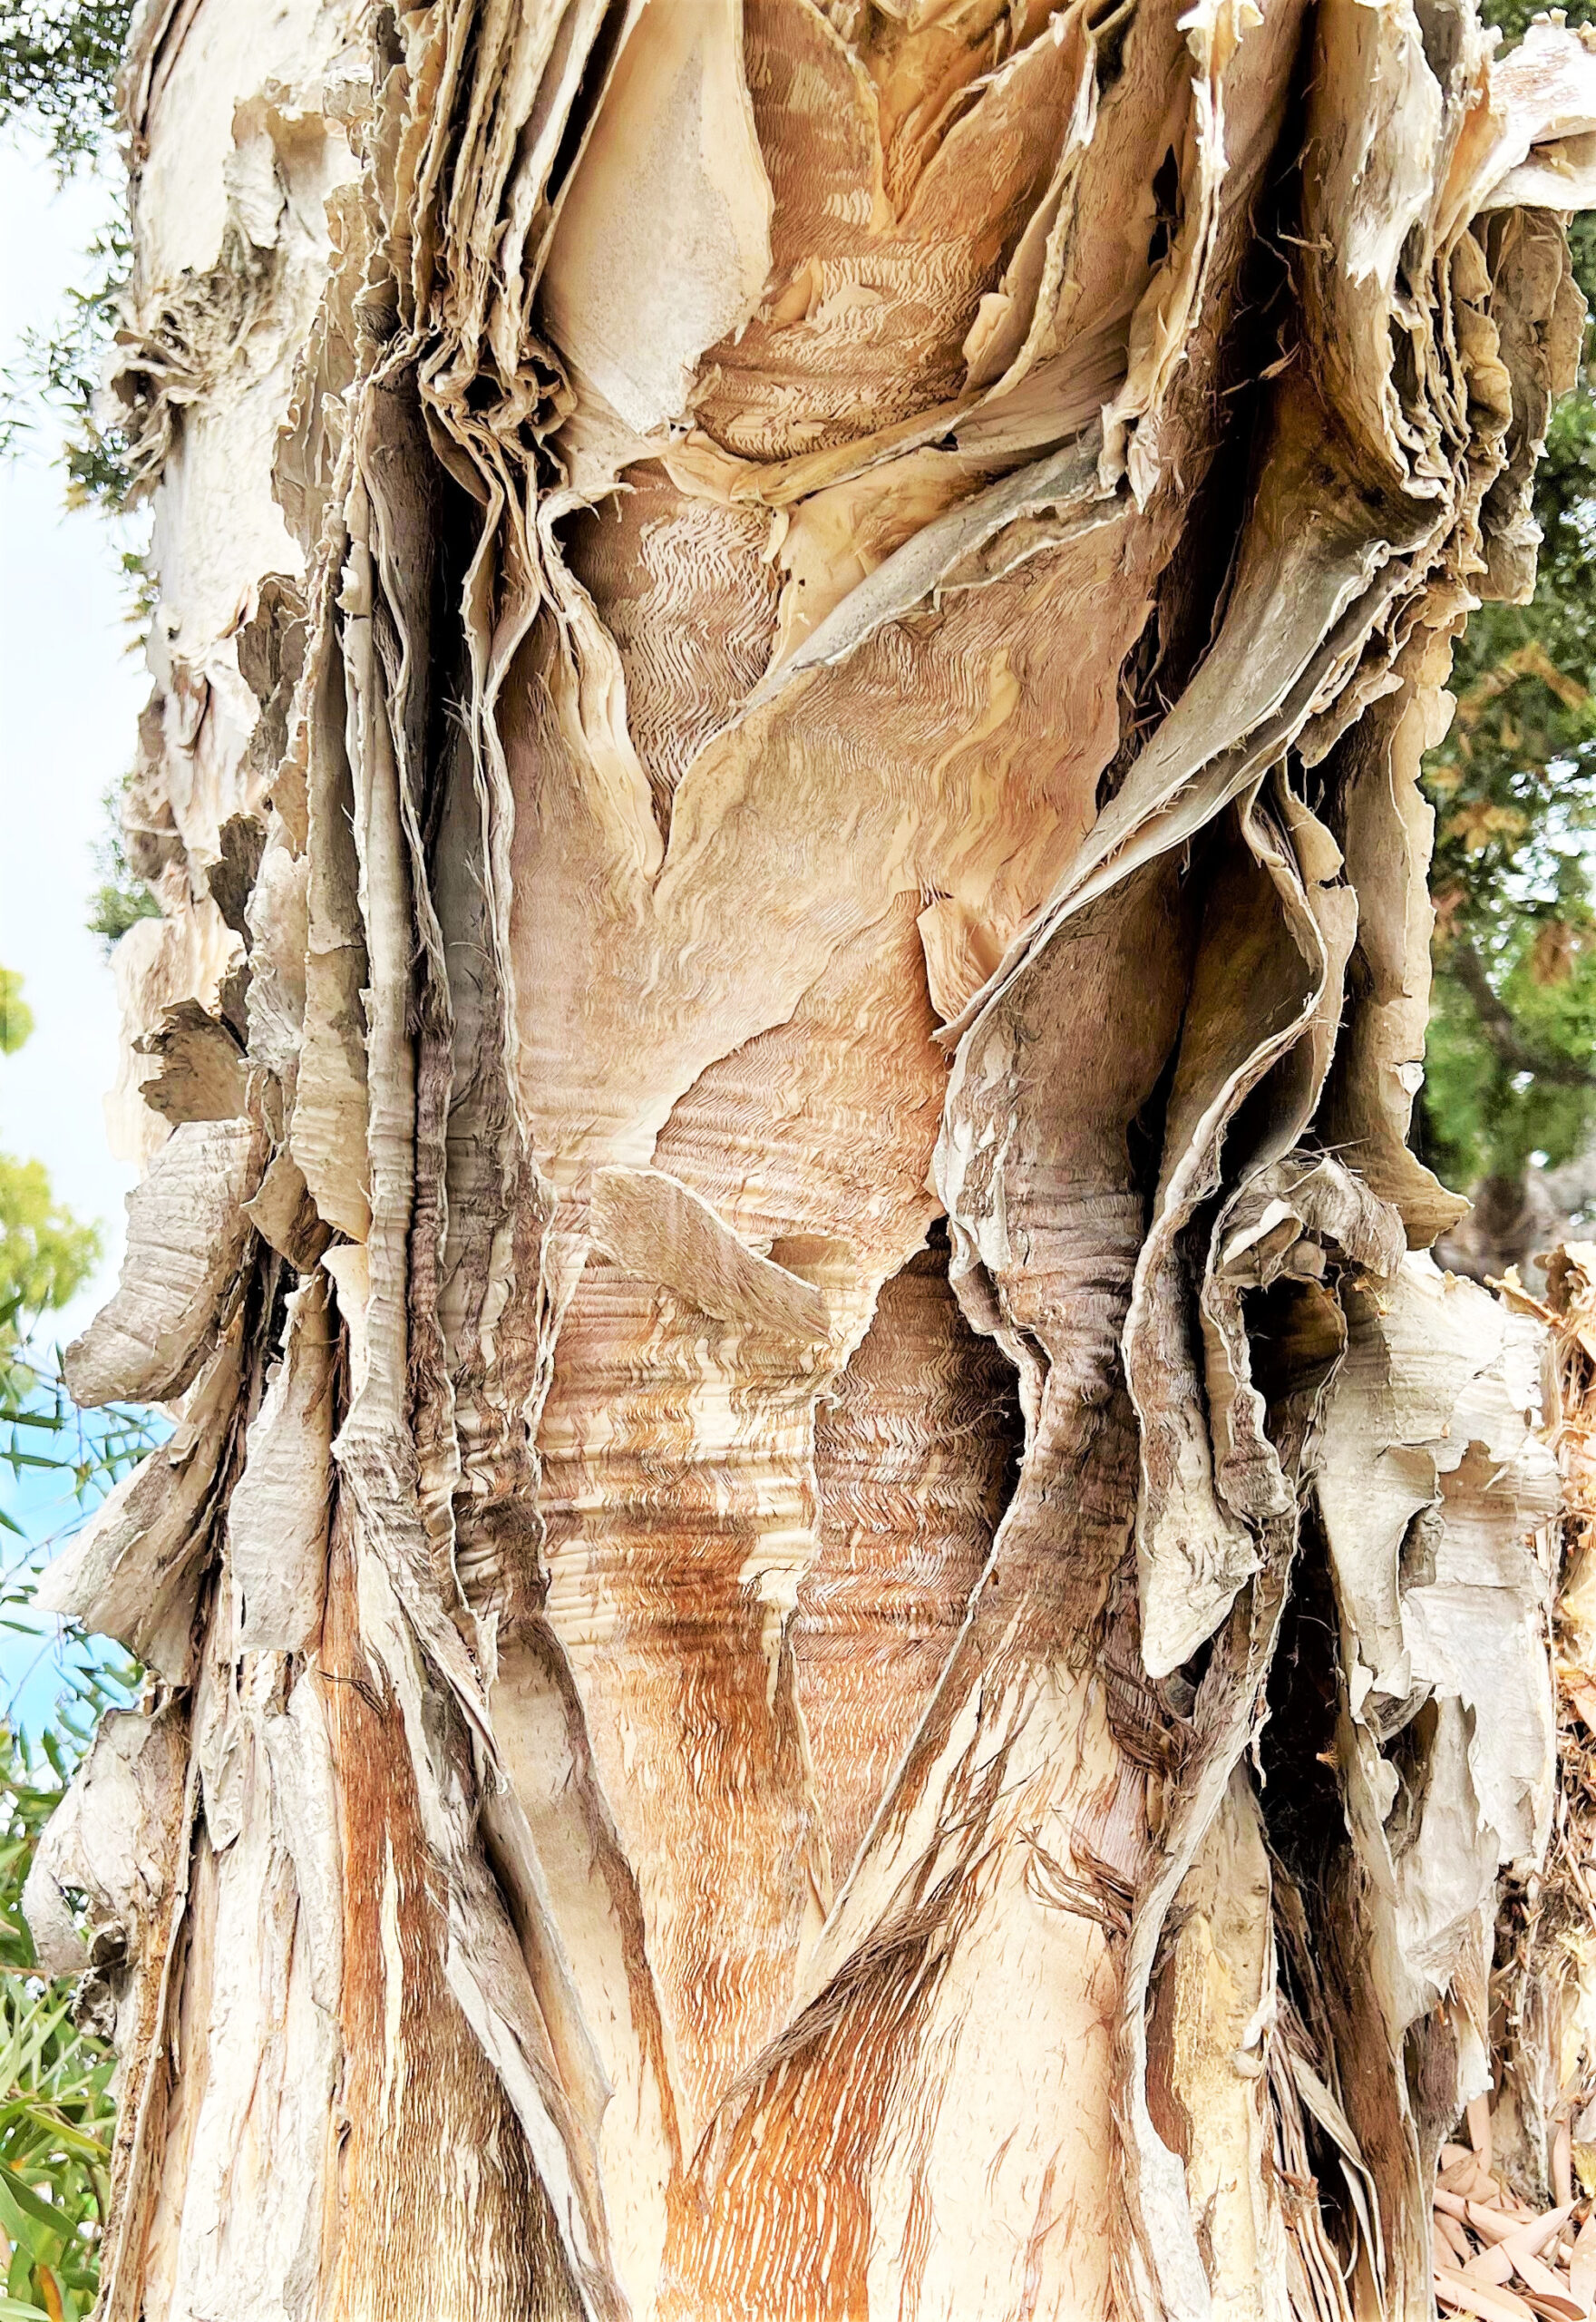 photo detail of the bark of the Paperbark Tree